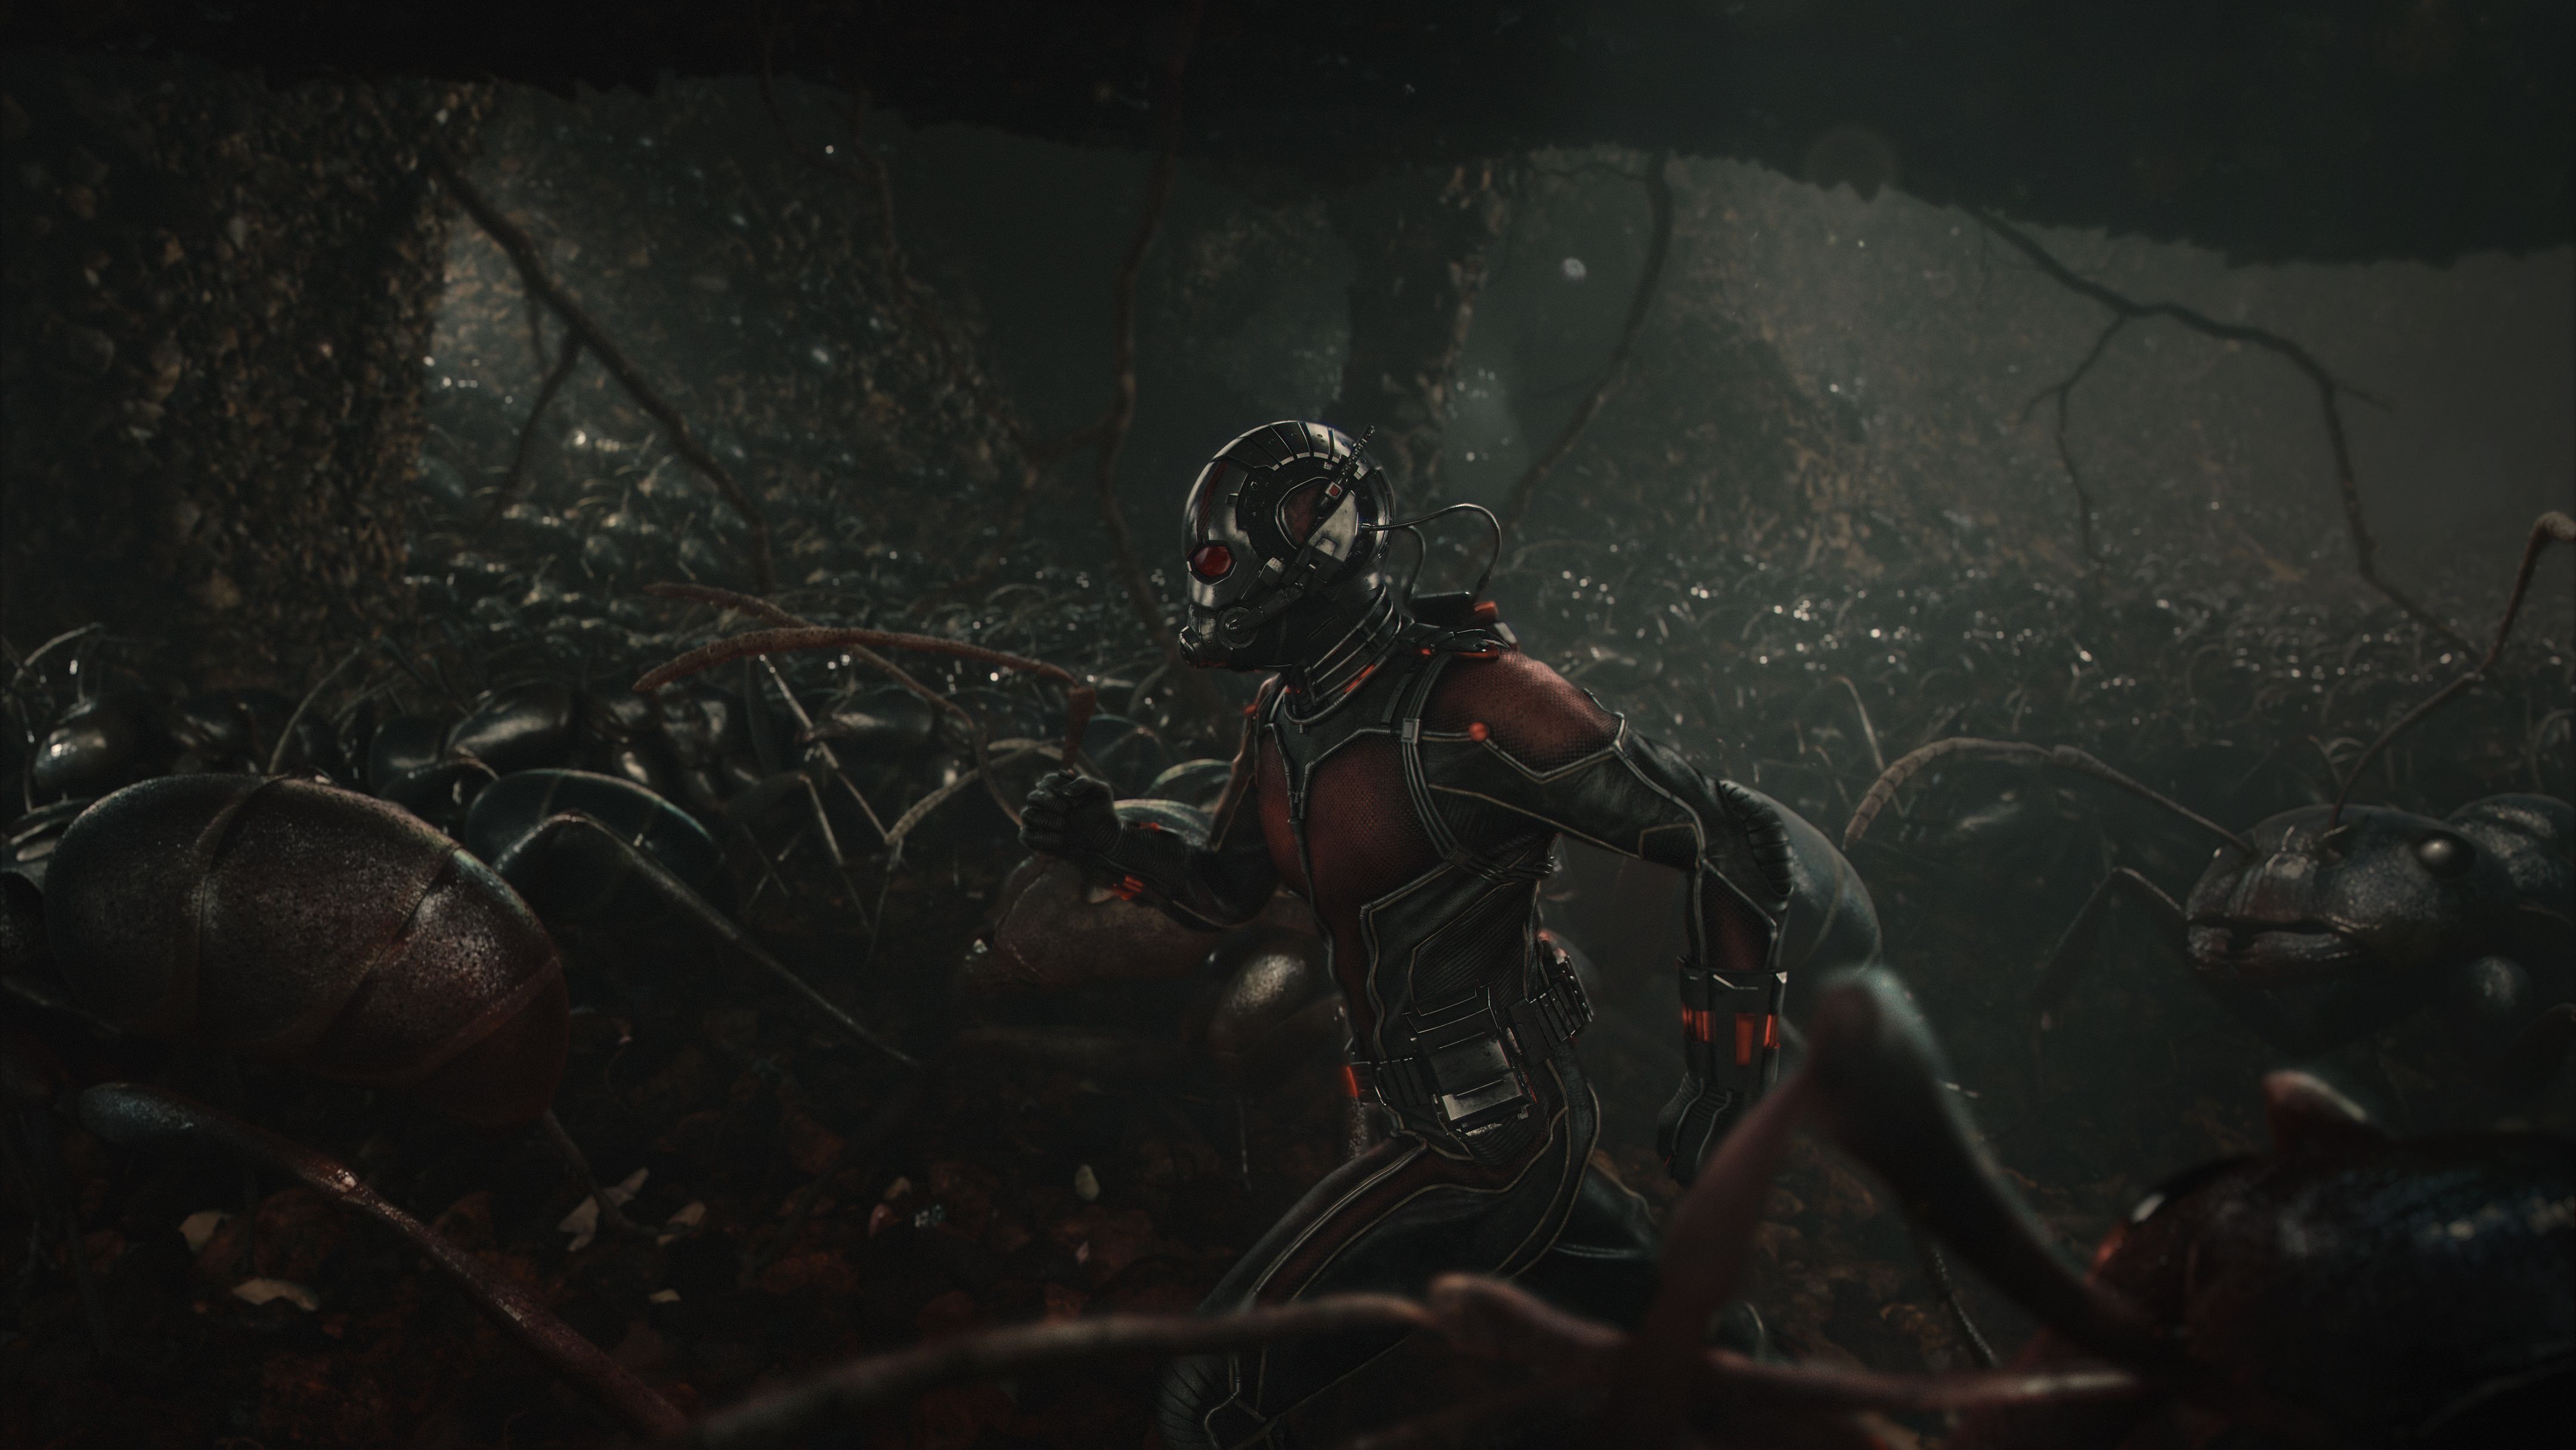 Ant-Man Running with Ant Army - Marvel HD Photo